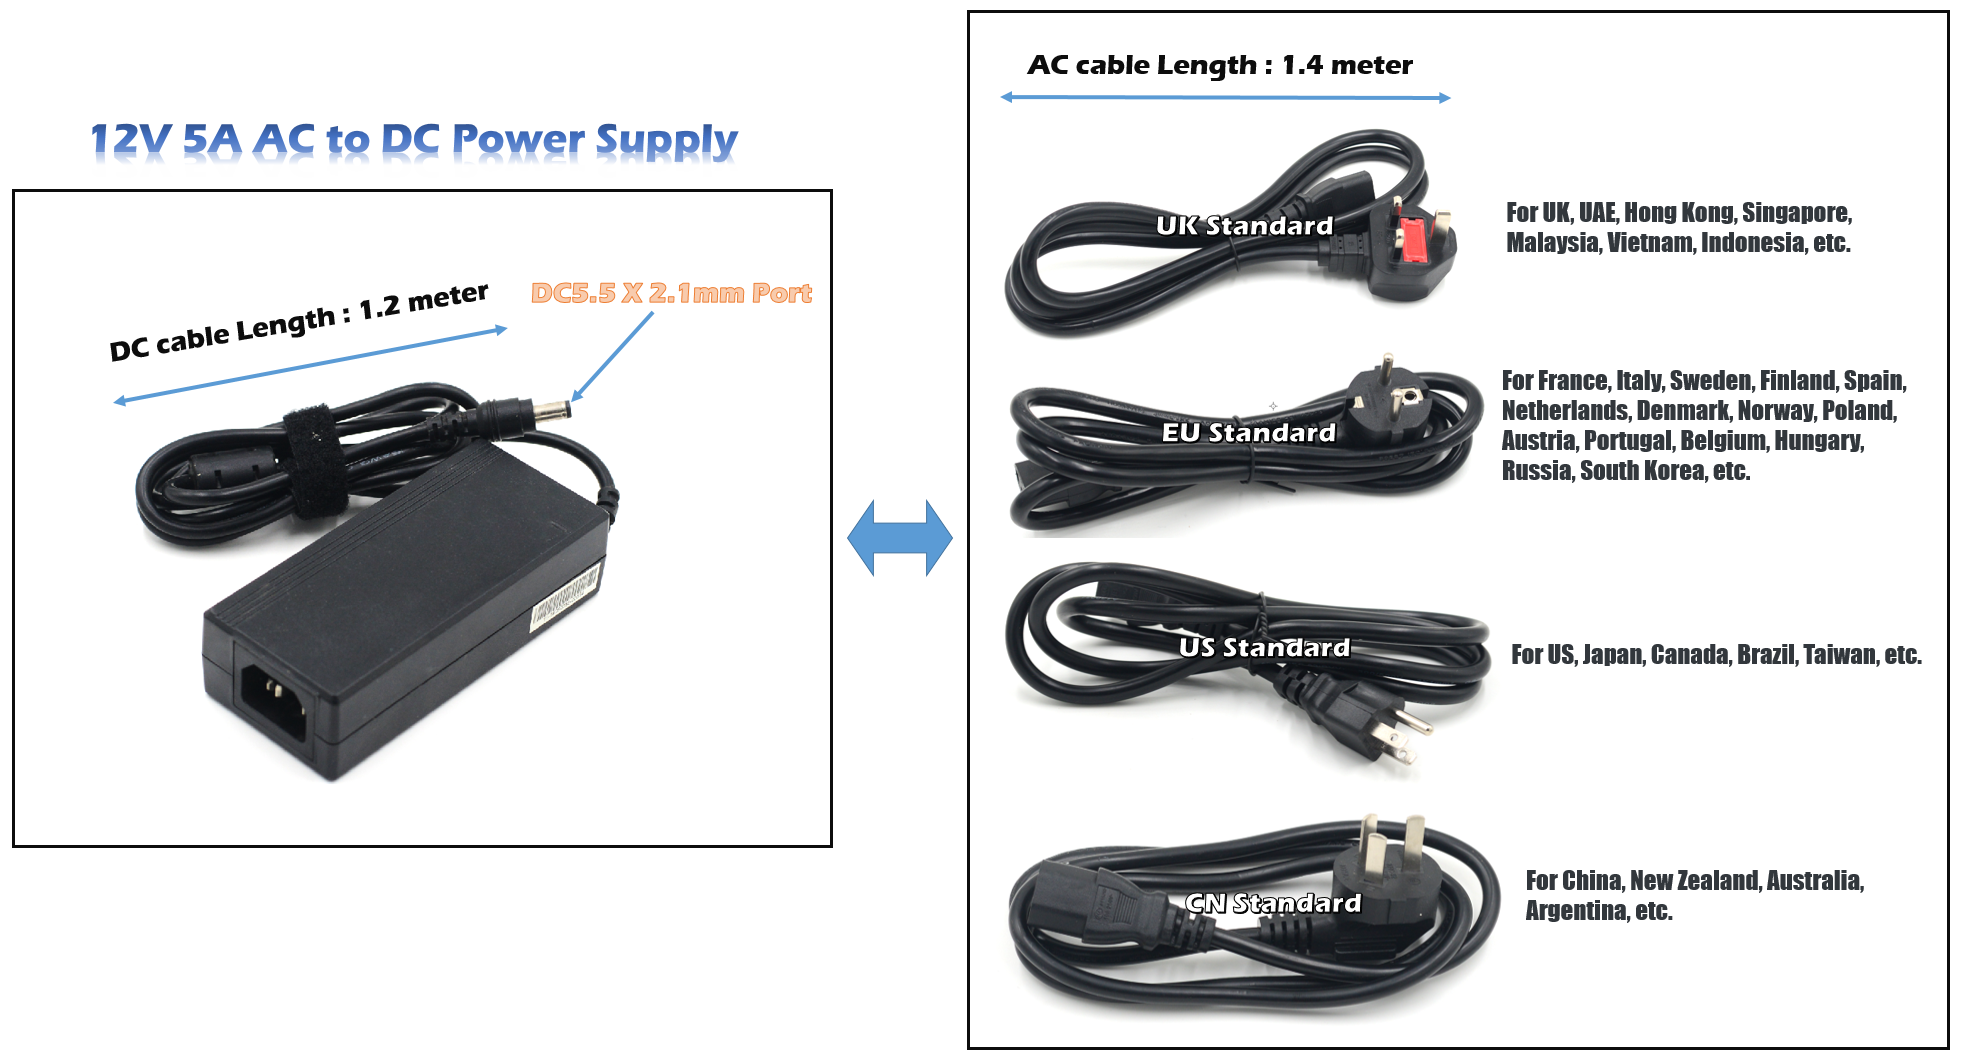 http://player-one-astronomy.com/wp-content/uploads/2022/11/12V-5A-Power-supply.png